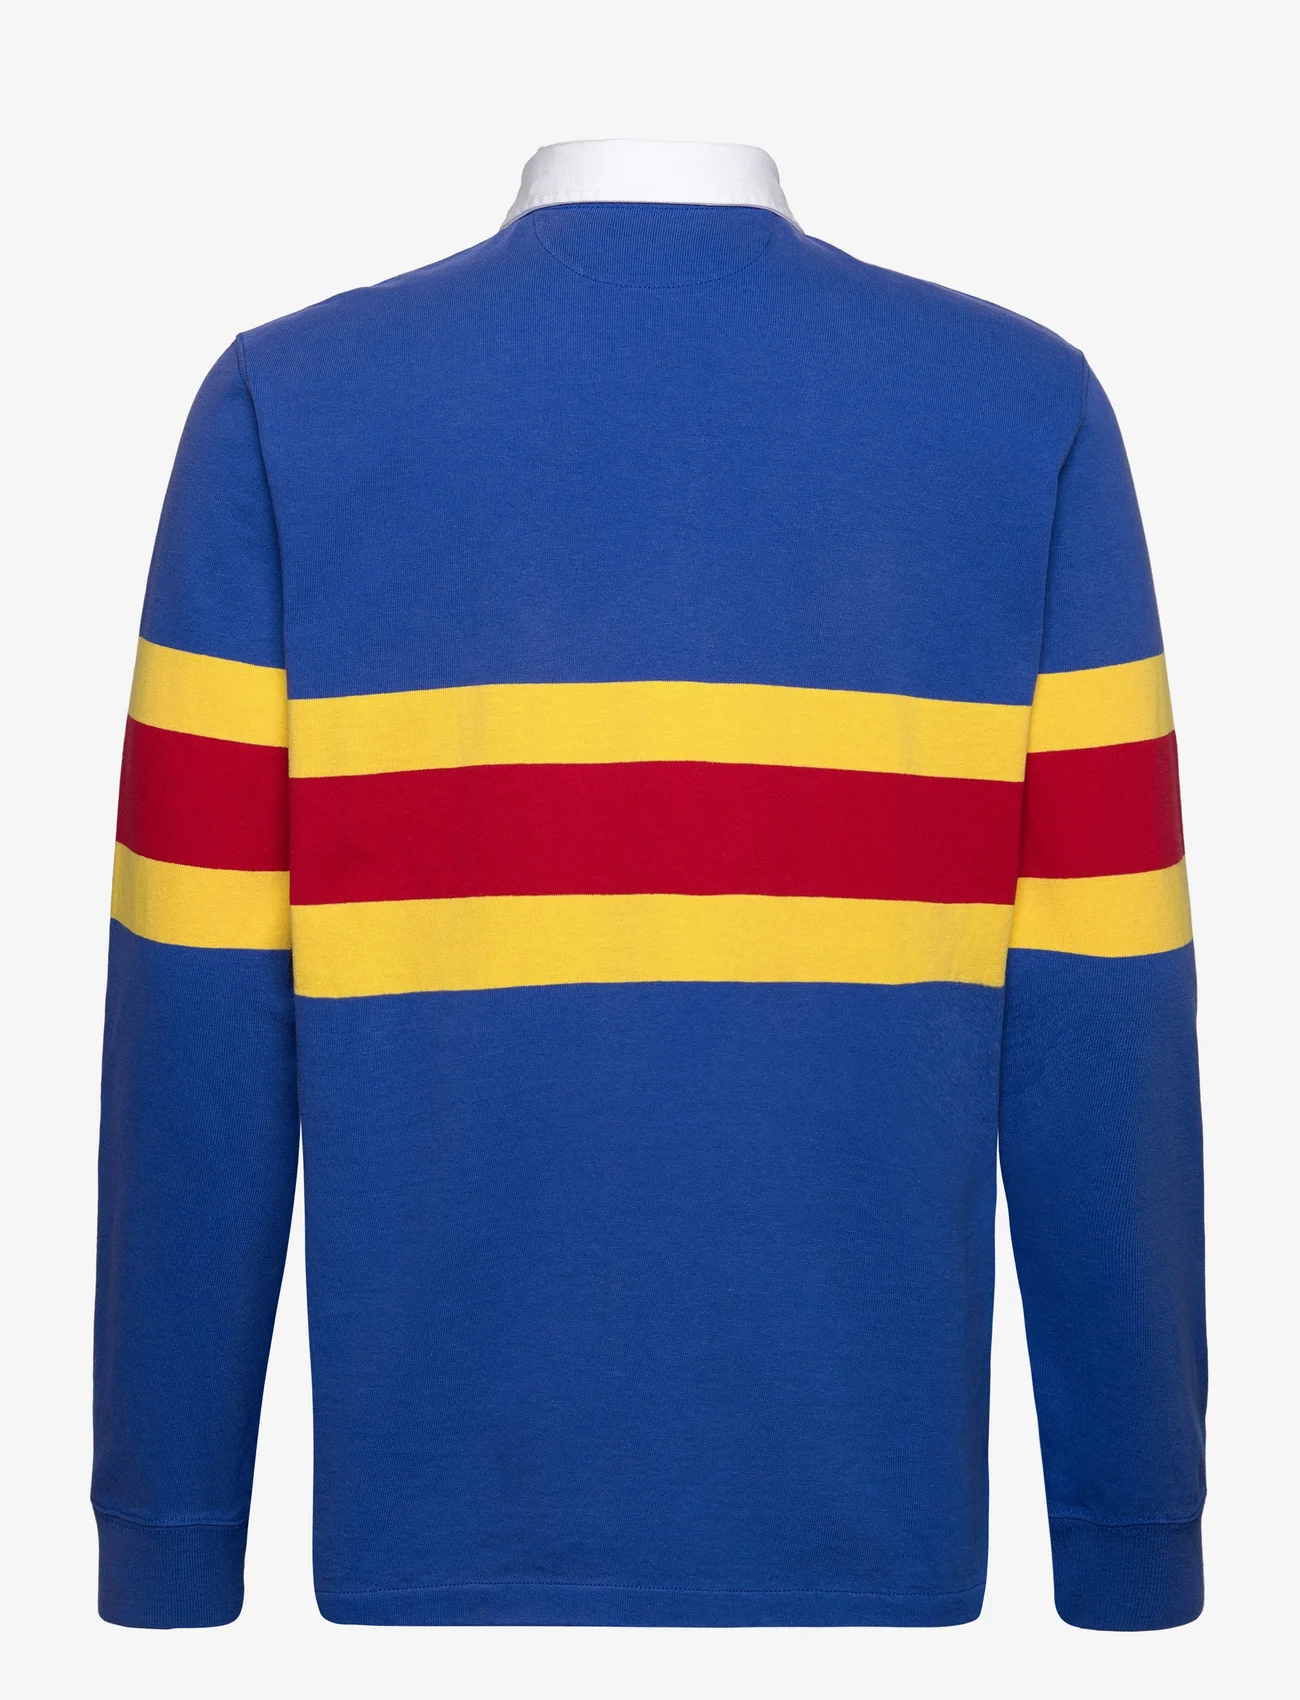 Polo Ralph Lauren - Classic Fit Striped Jersey Rugby Shirt - langermede - blue saturn multi - 1